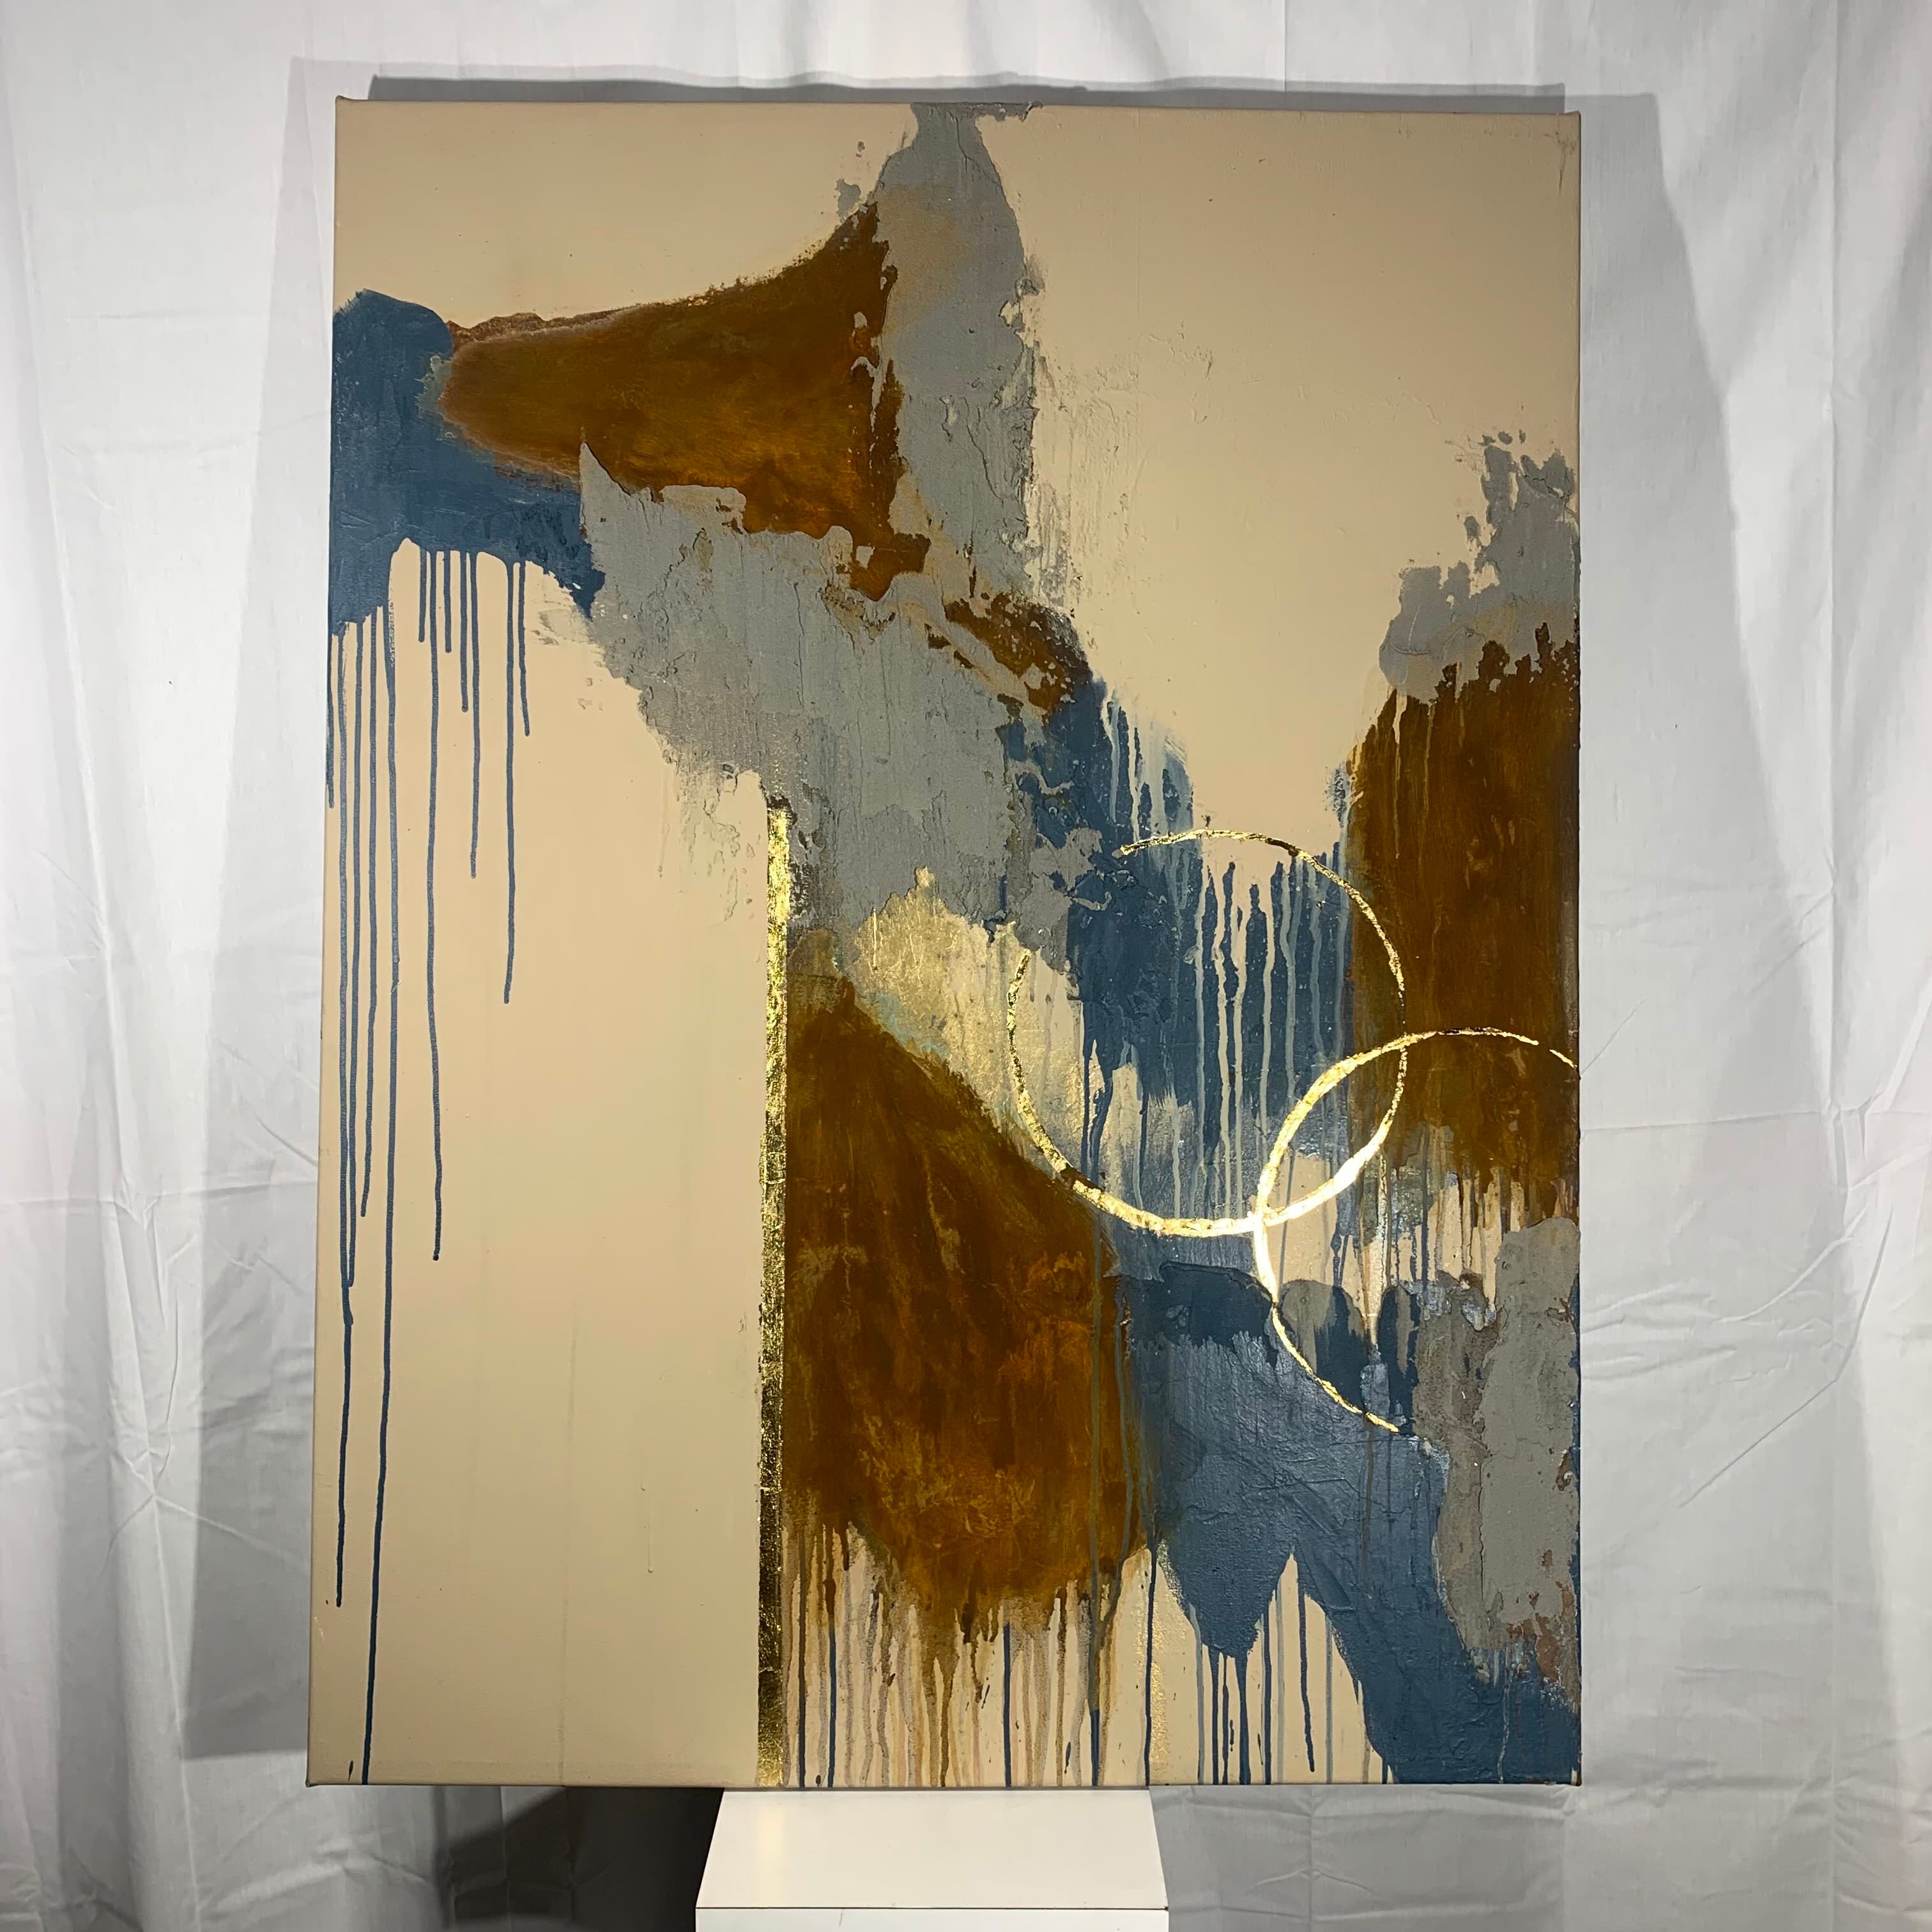 36"x 48" Modern Blue and Brown with Gold Leaf by Unknown Artist Mixed Media on Canvas